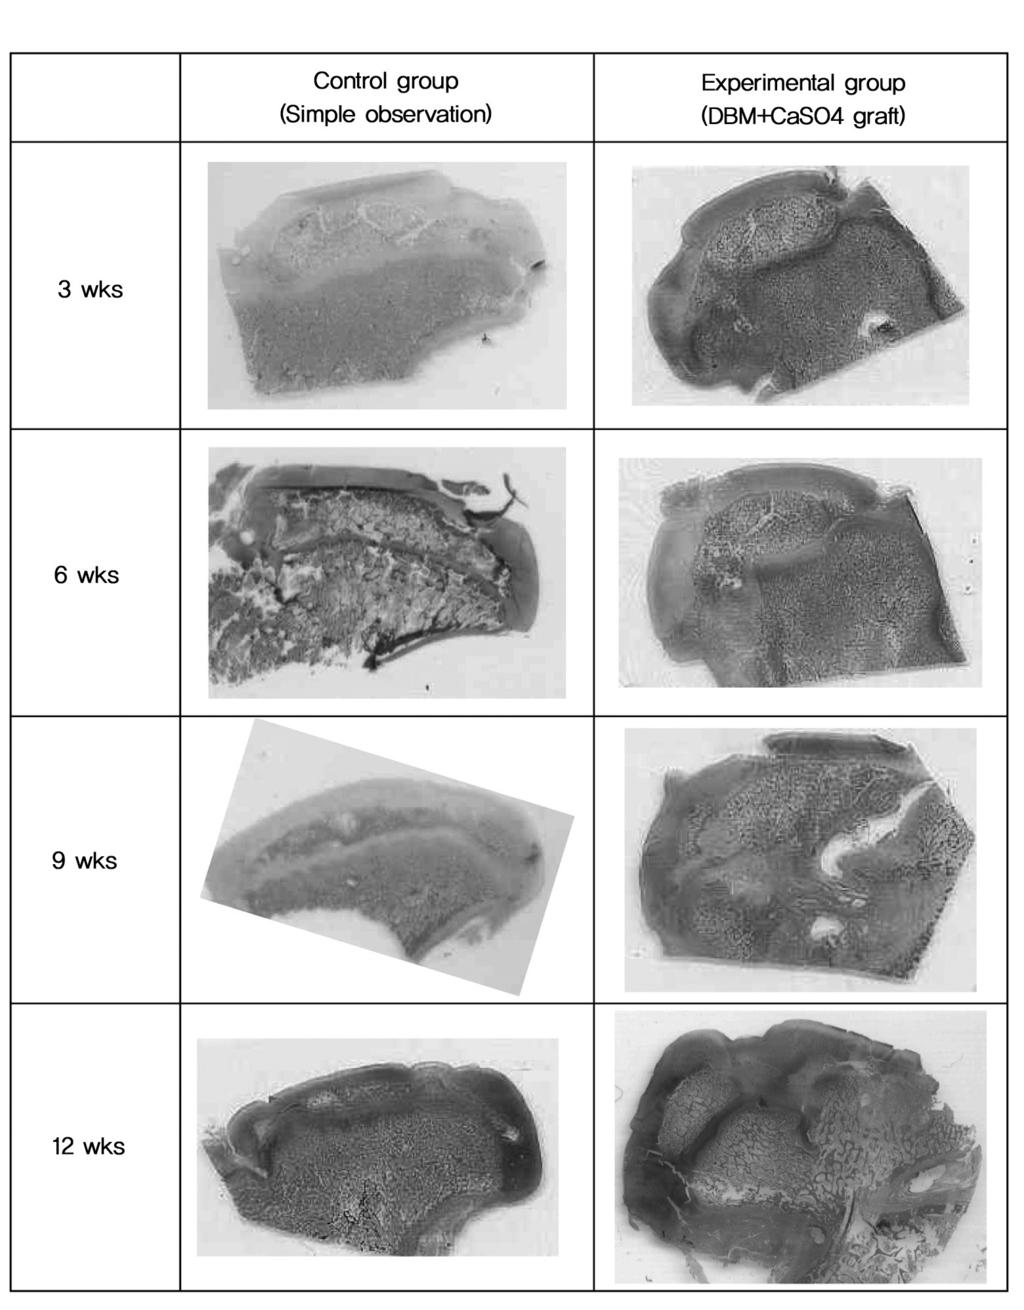 Fig. 1. Photomicrographs of femur head of each groups stained with Hematoxylin and Eosin at original scale.